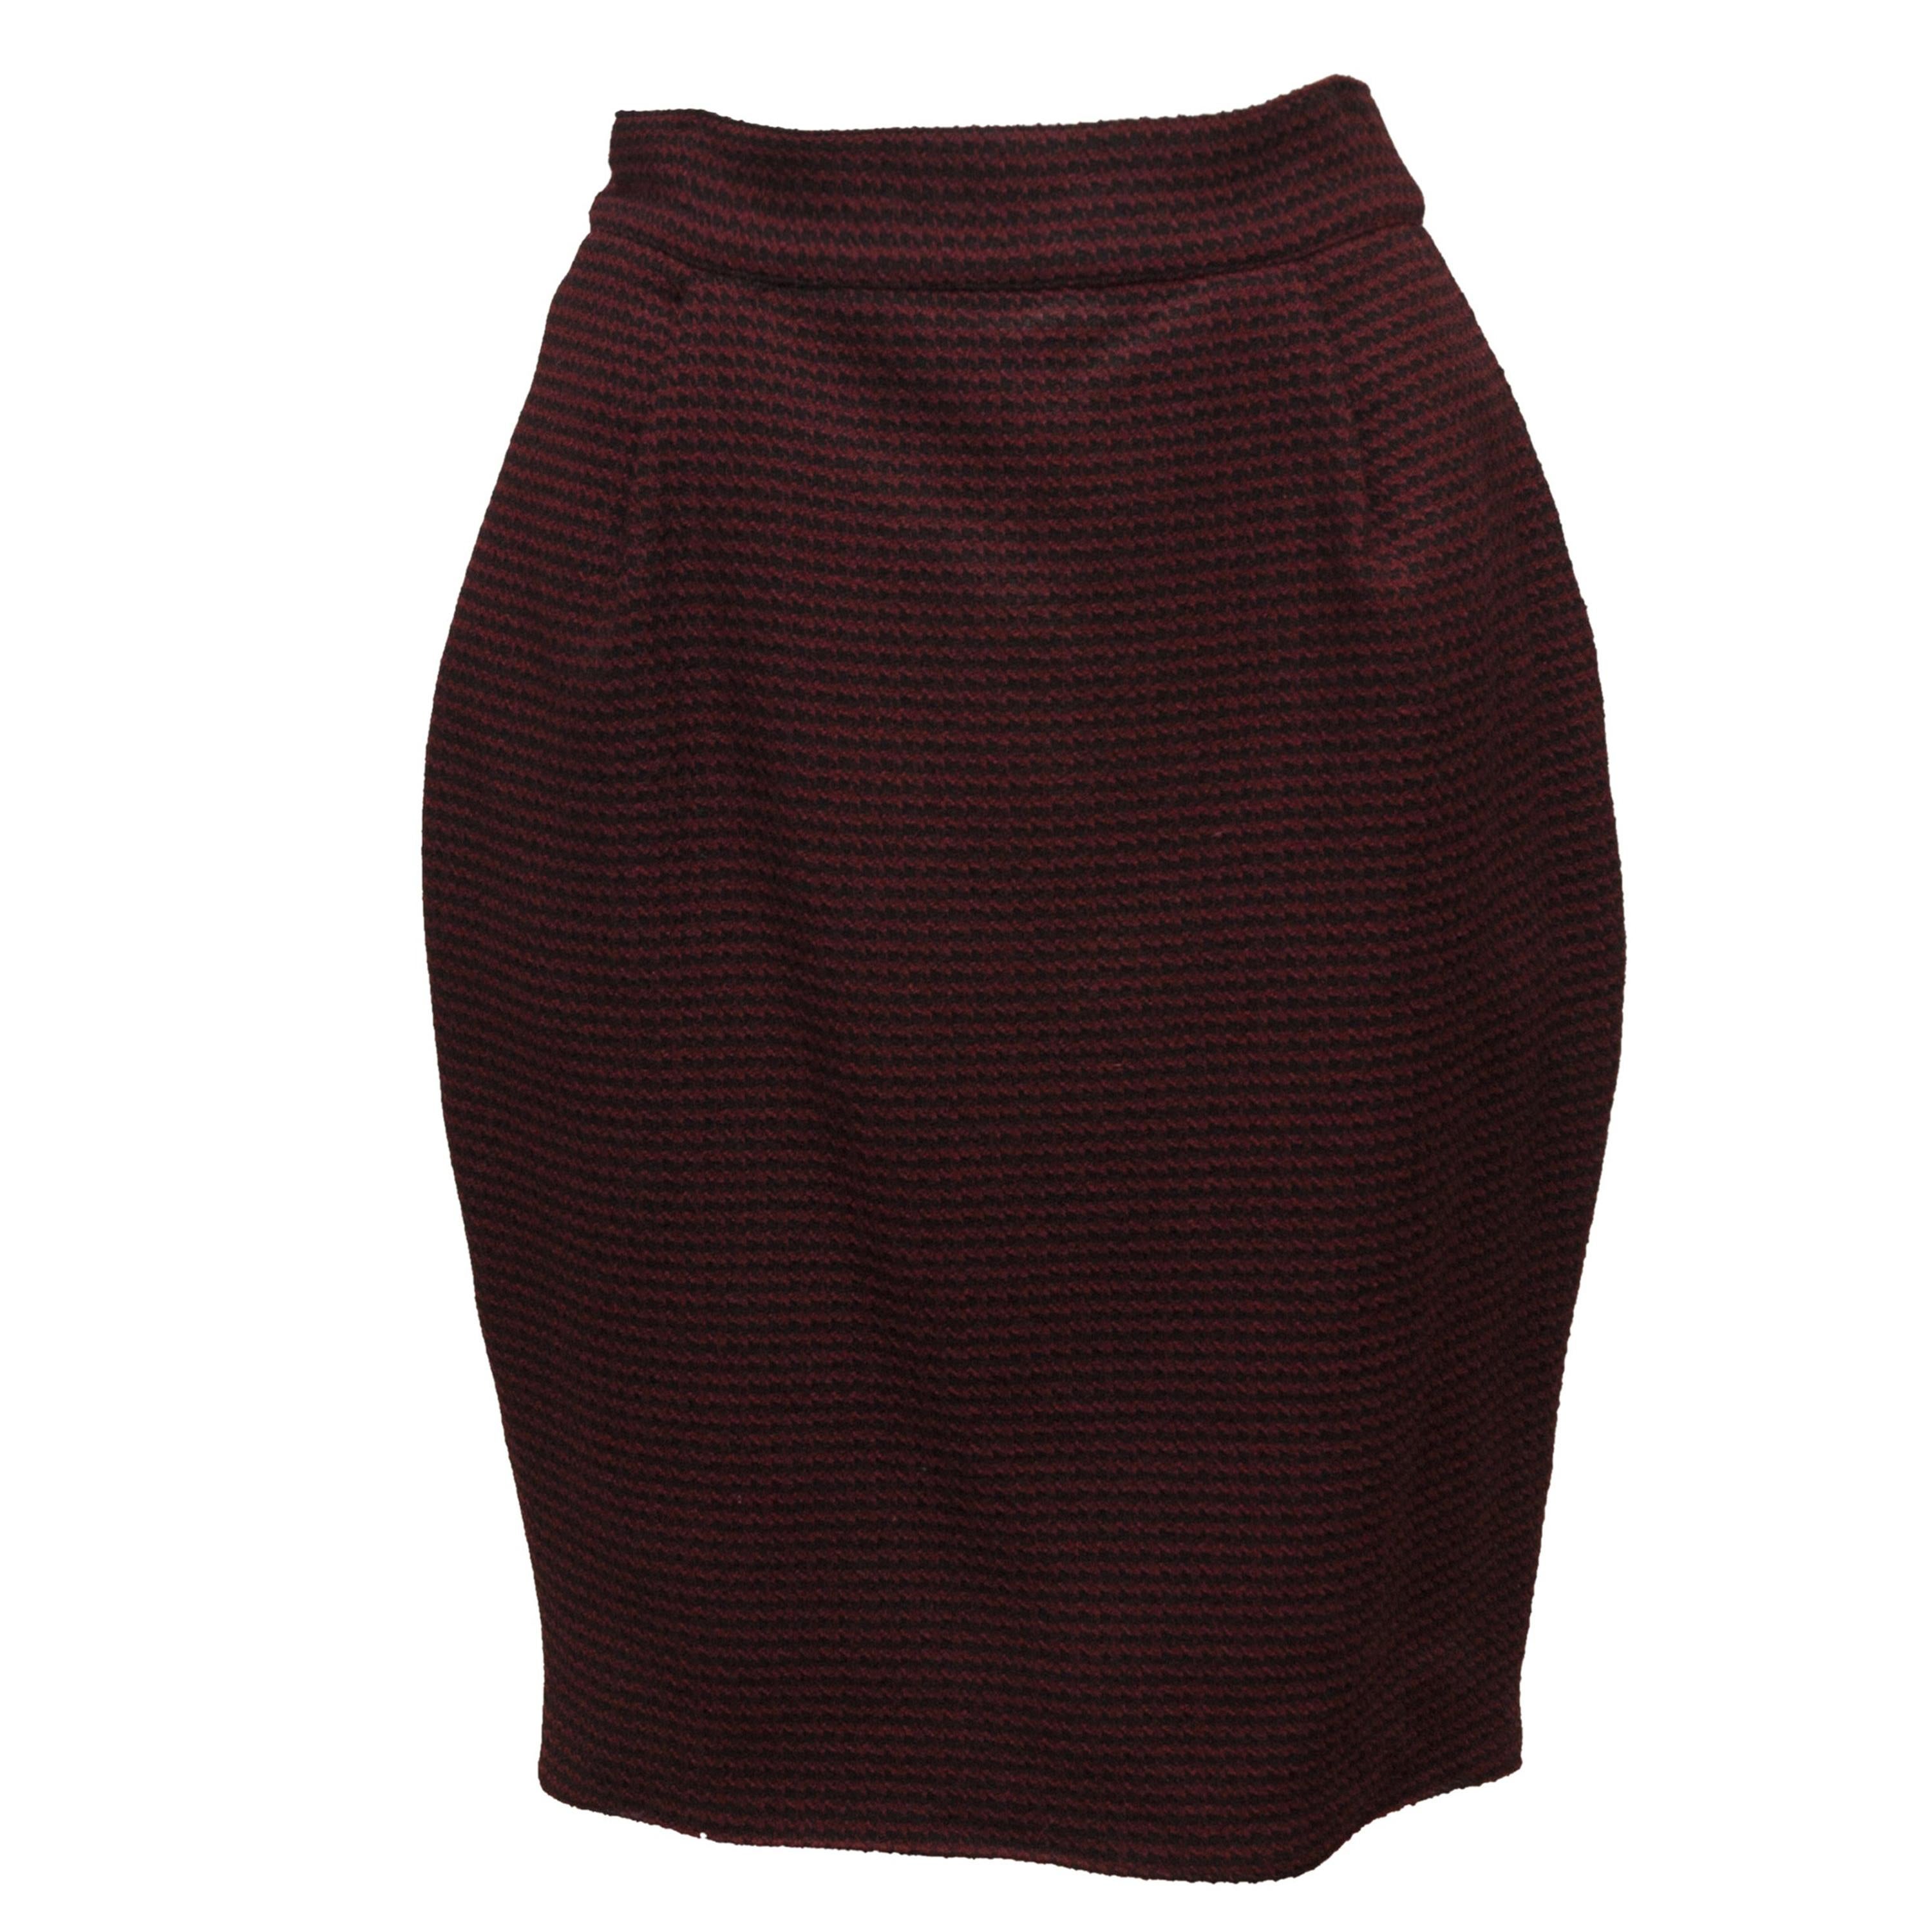 Christian Lacroix Burgundy & Black Wool Houndstooth Skirt Suit